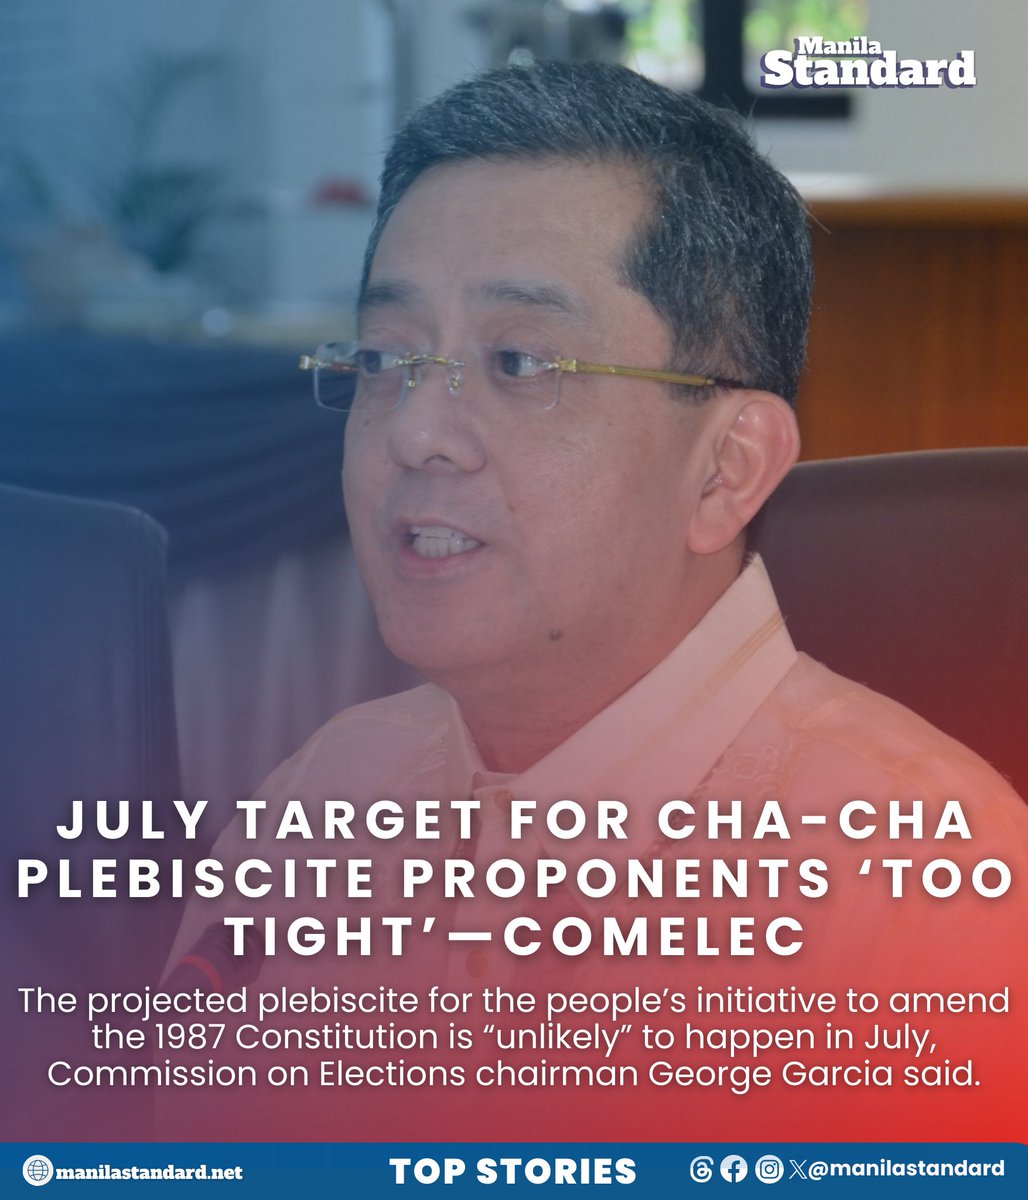 “Based on our monitoring, we have 253 districts. And it seems that none of the 253 districts have the signatures submitted to our local Comelec yet. It should be from all the districts in the Philippines,” Garcia said. READ: manilastandard.net/news/top-stori…